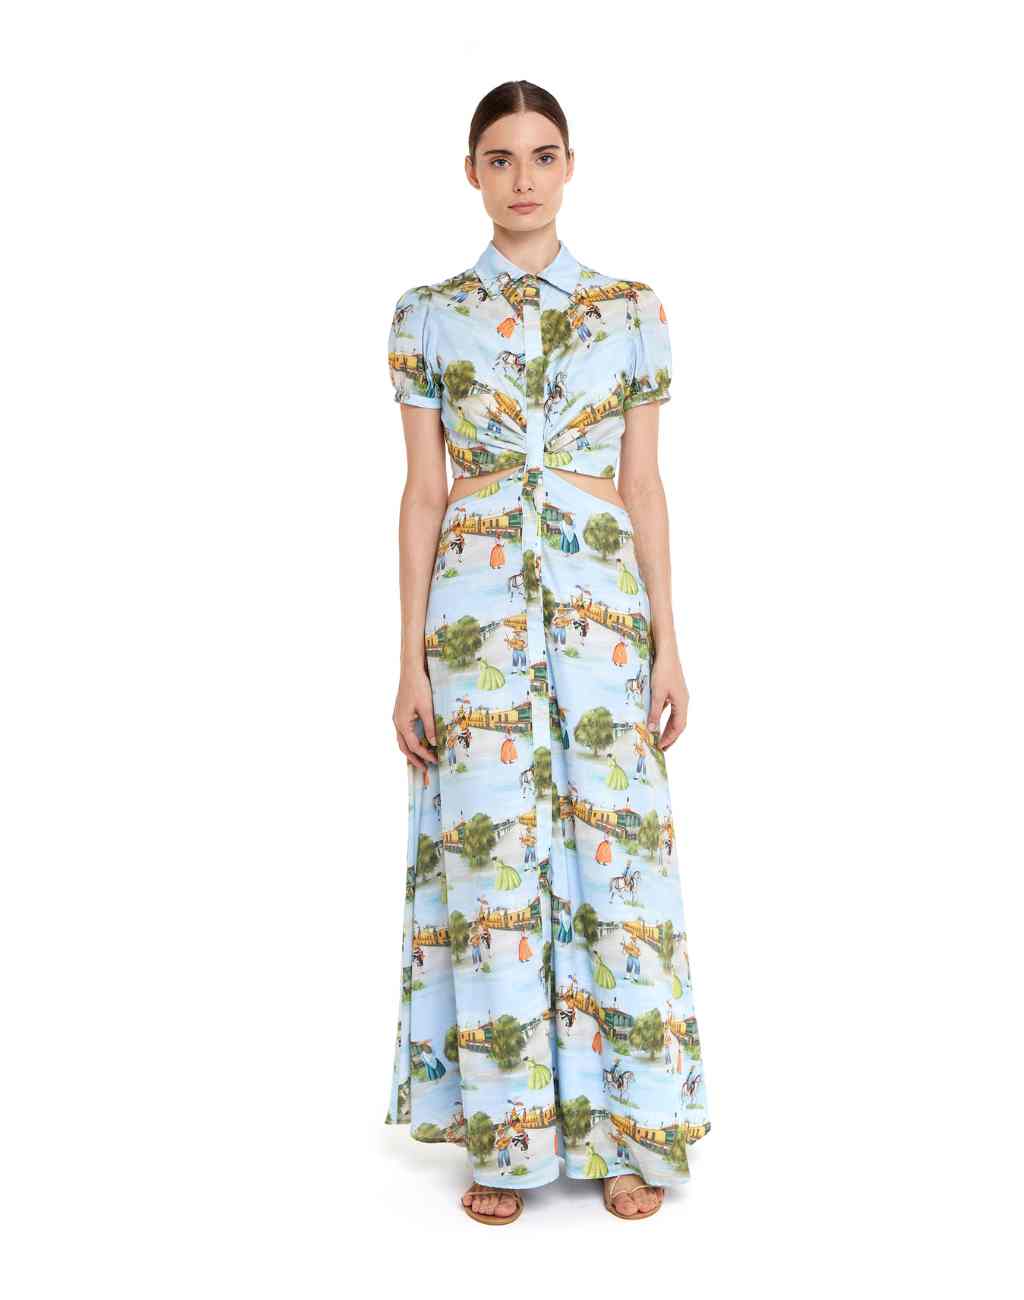 Limeña Maxi Dress with Waist and Back Cutout in the Lima Print - Visit Nifty Fasce 